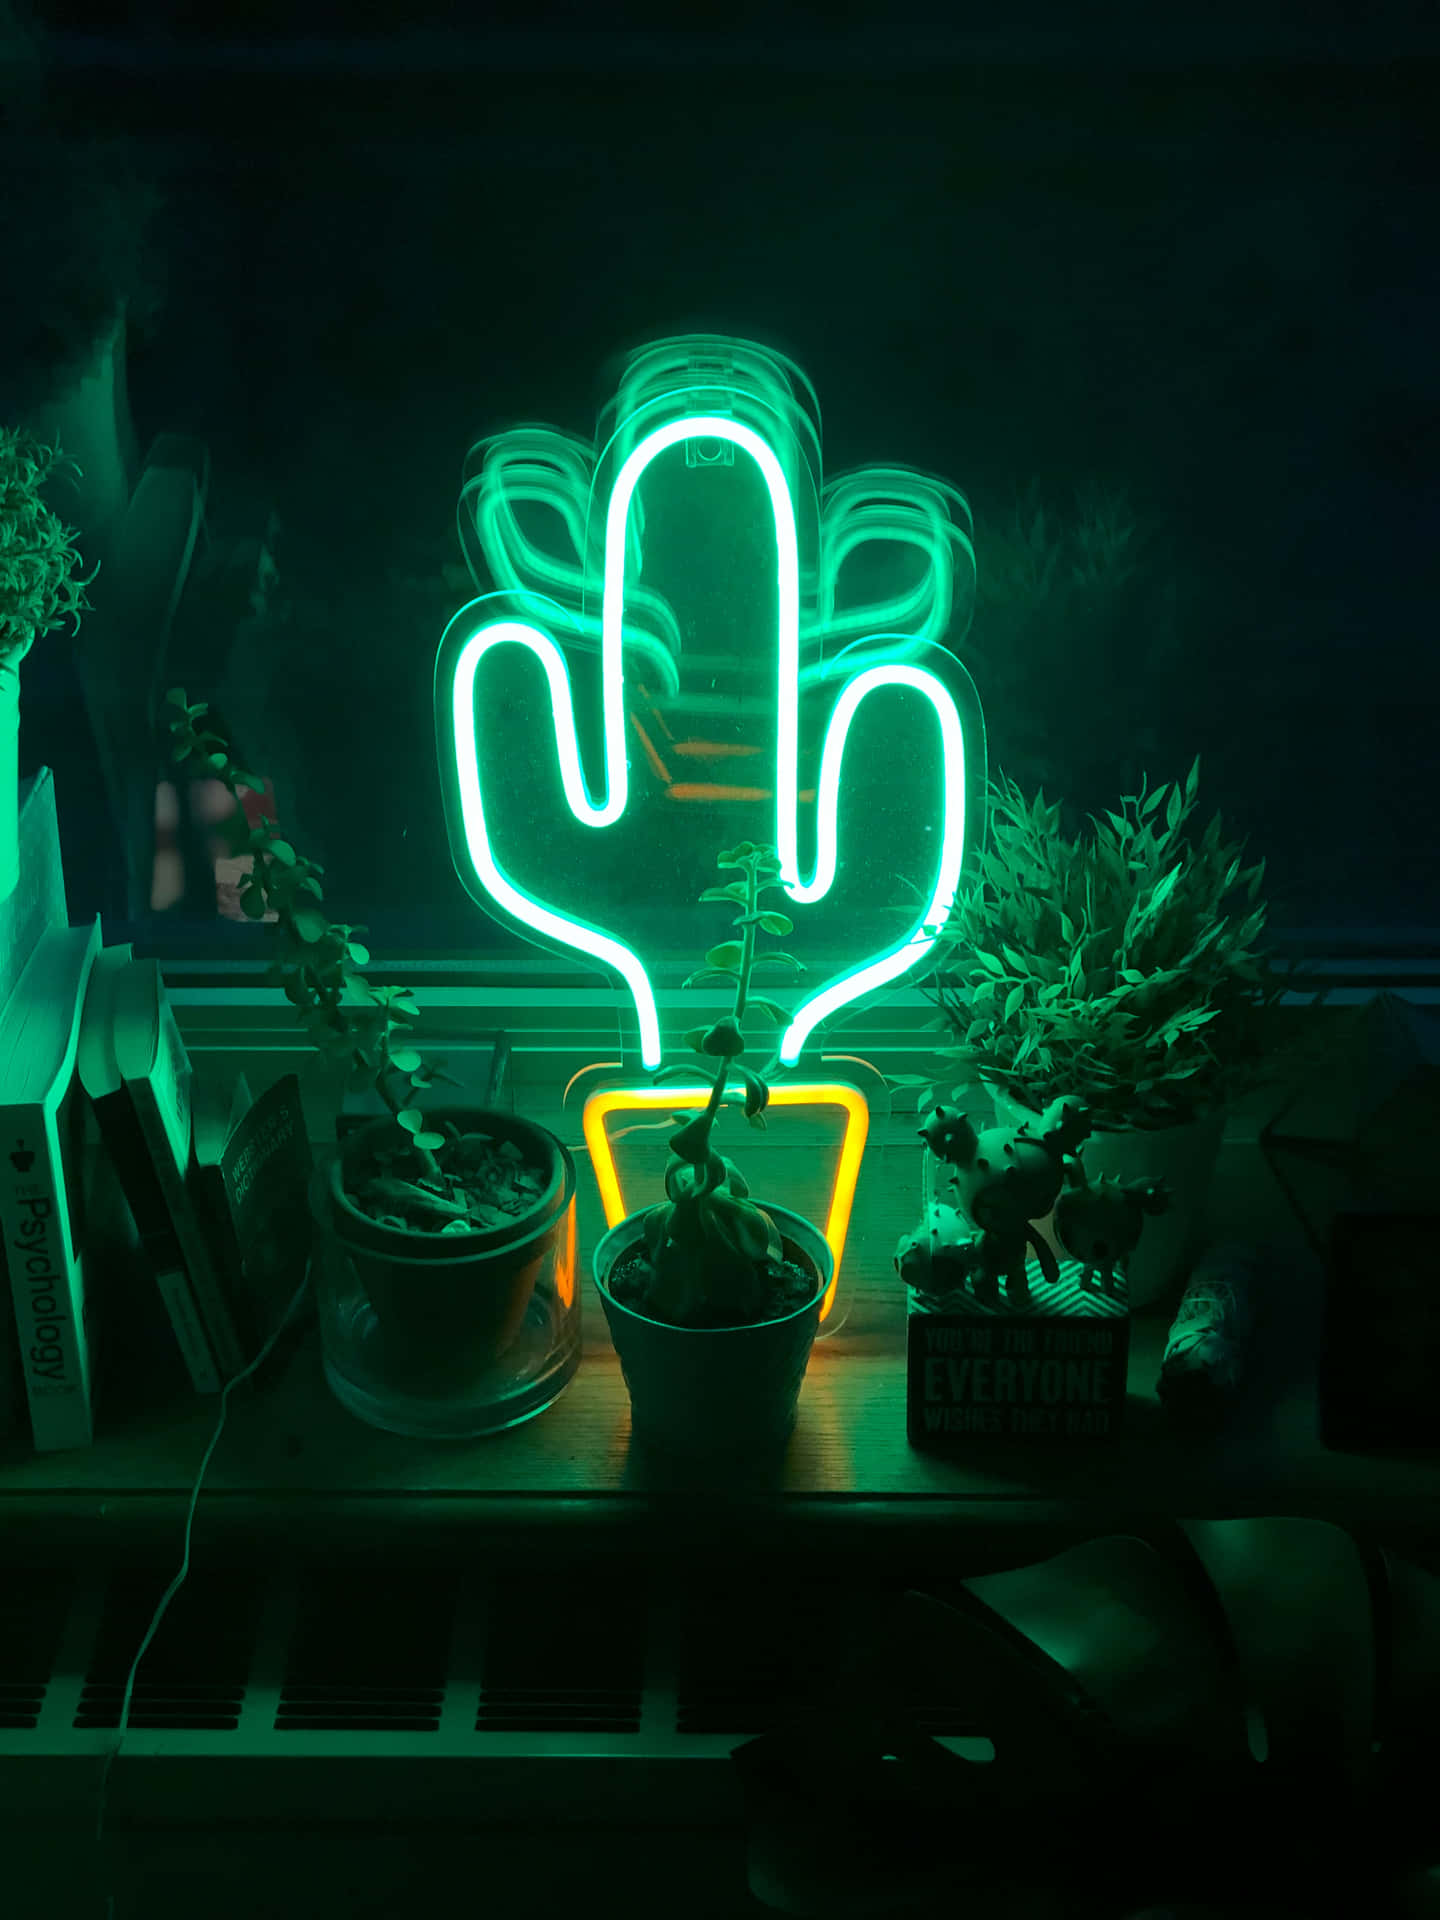 Make your space come alive with a beautiful neon aesthetic.